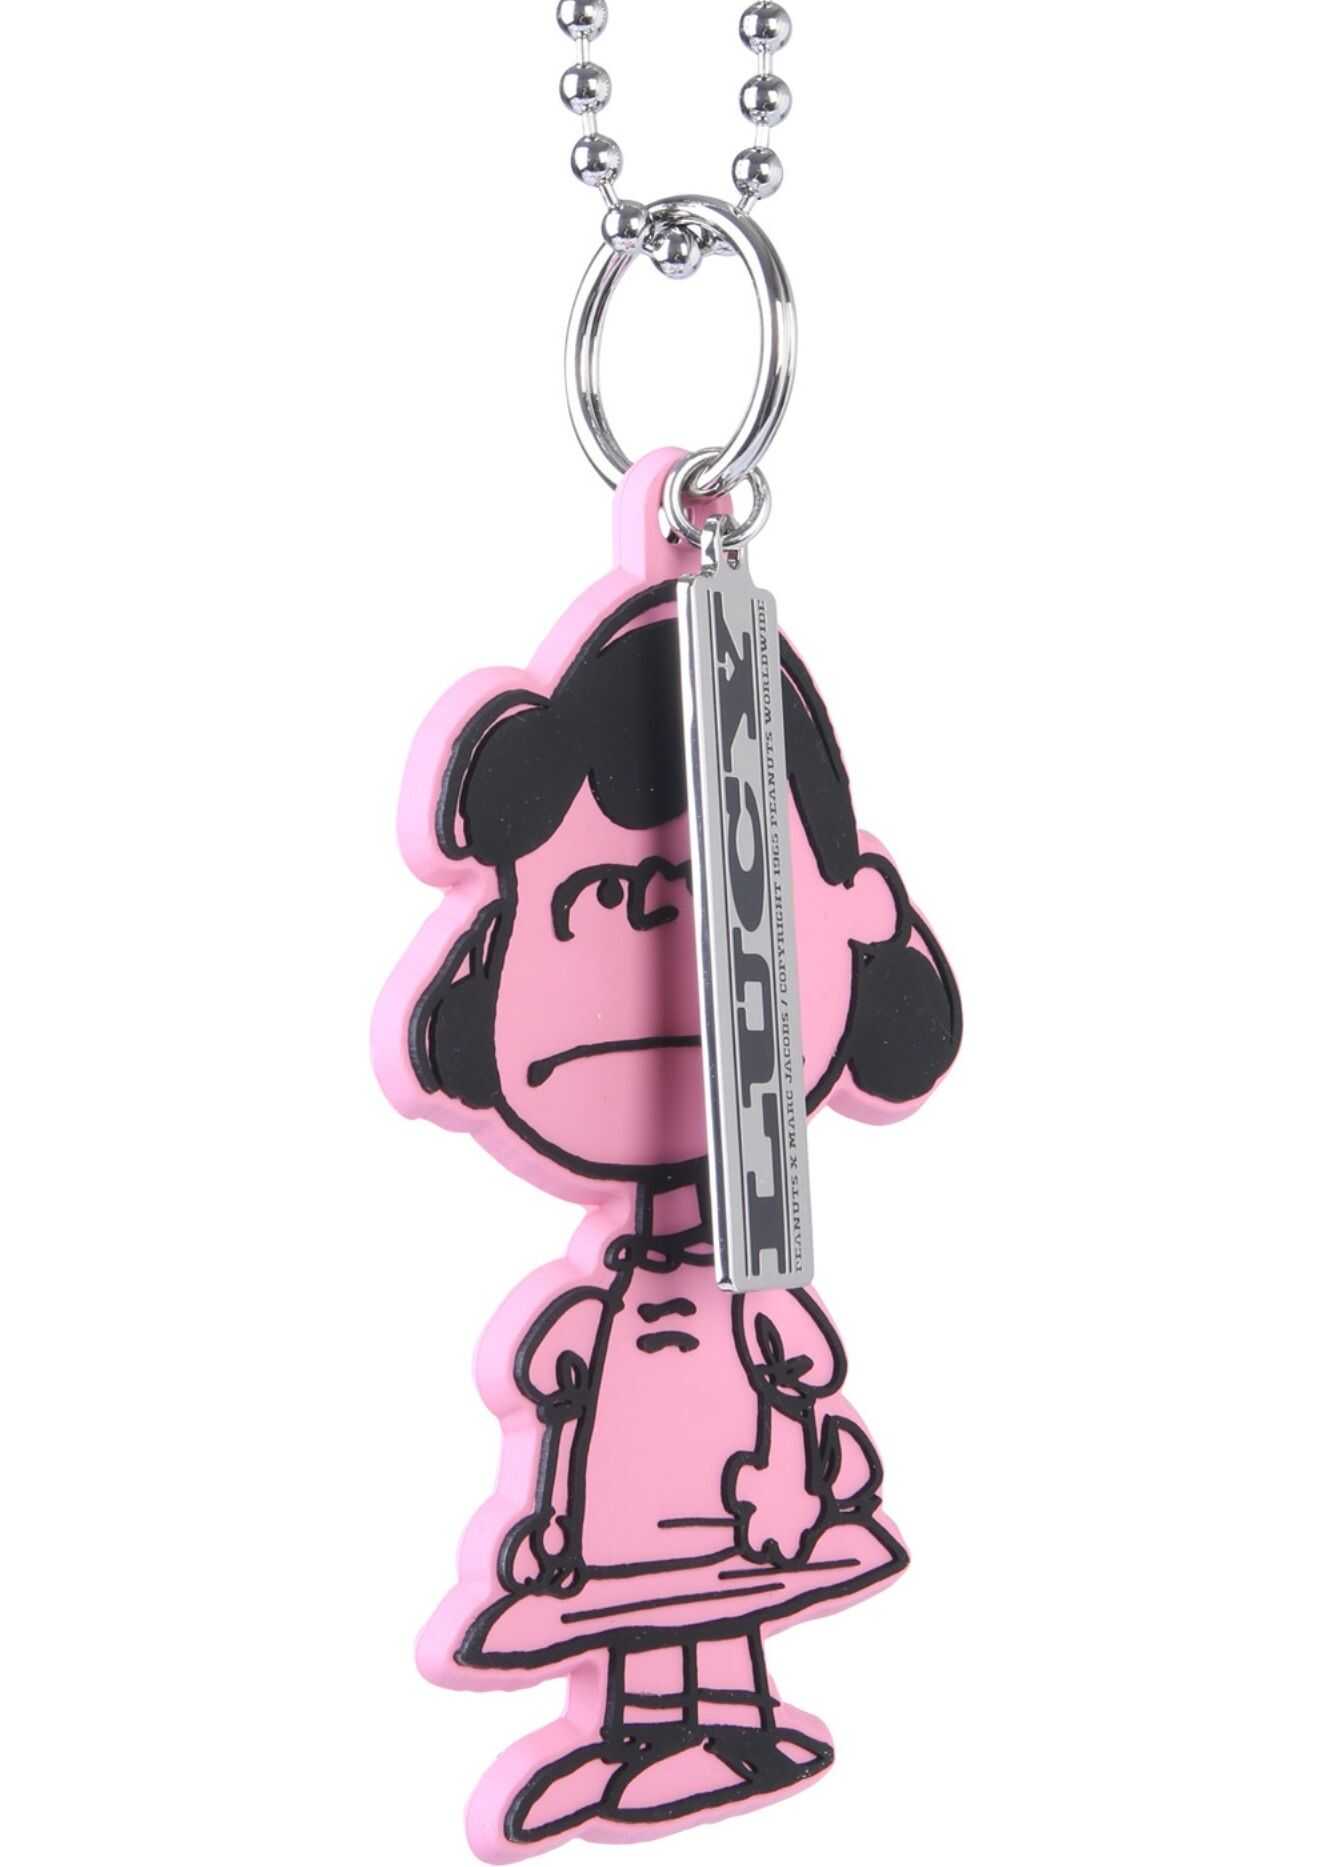 Marc Jacobs "Lucy" Key Holder PINK